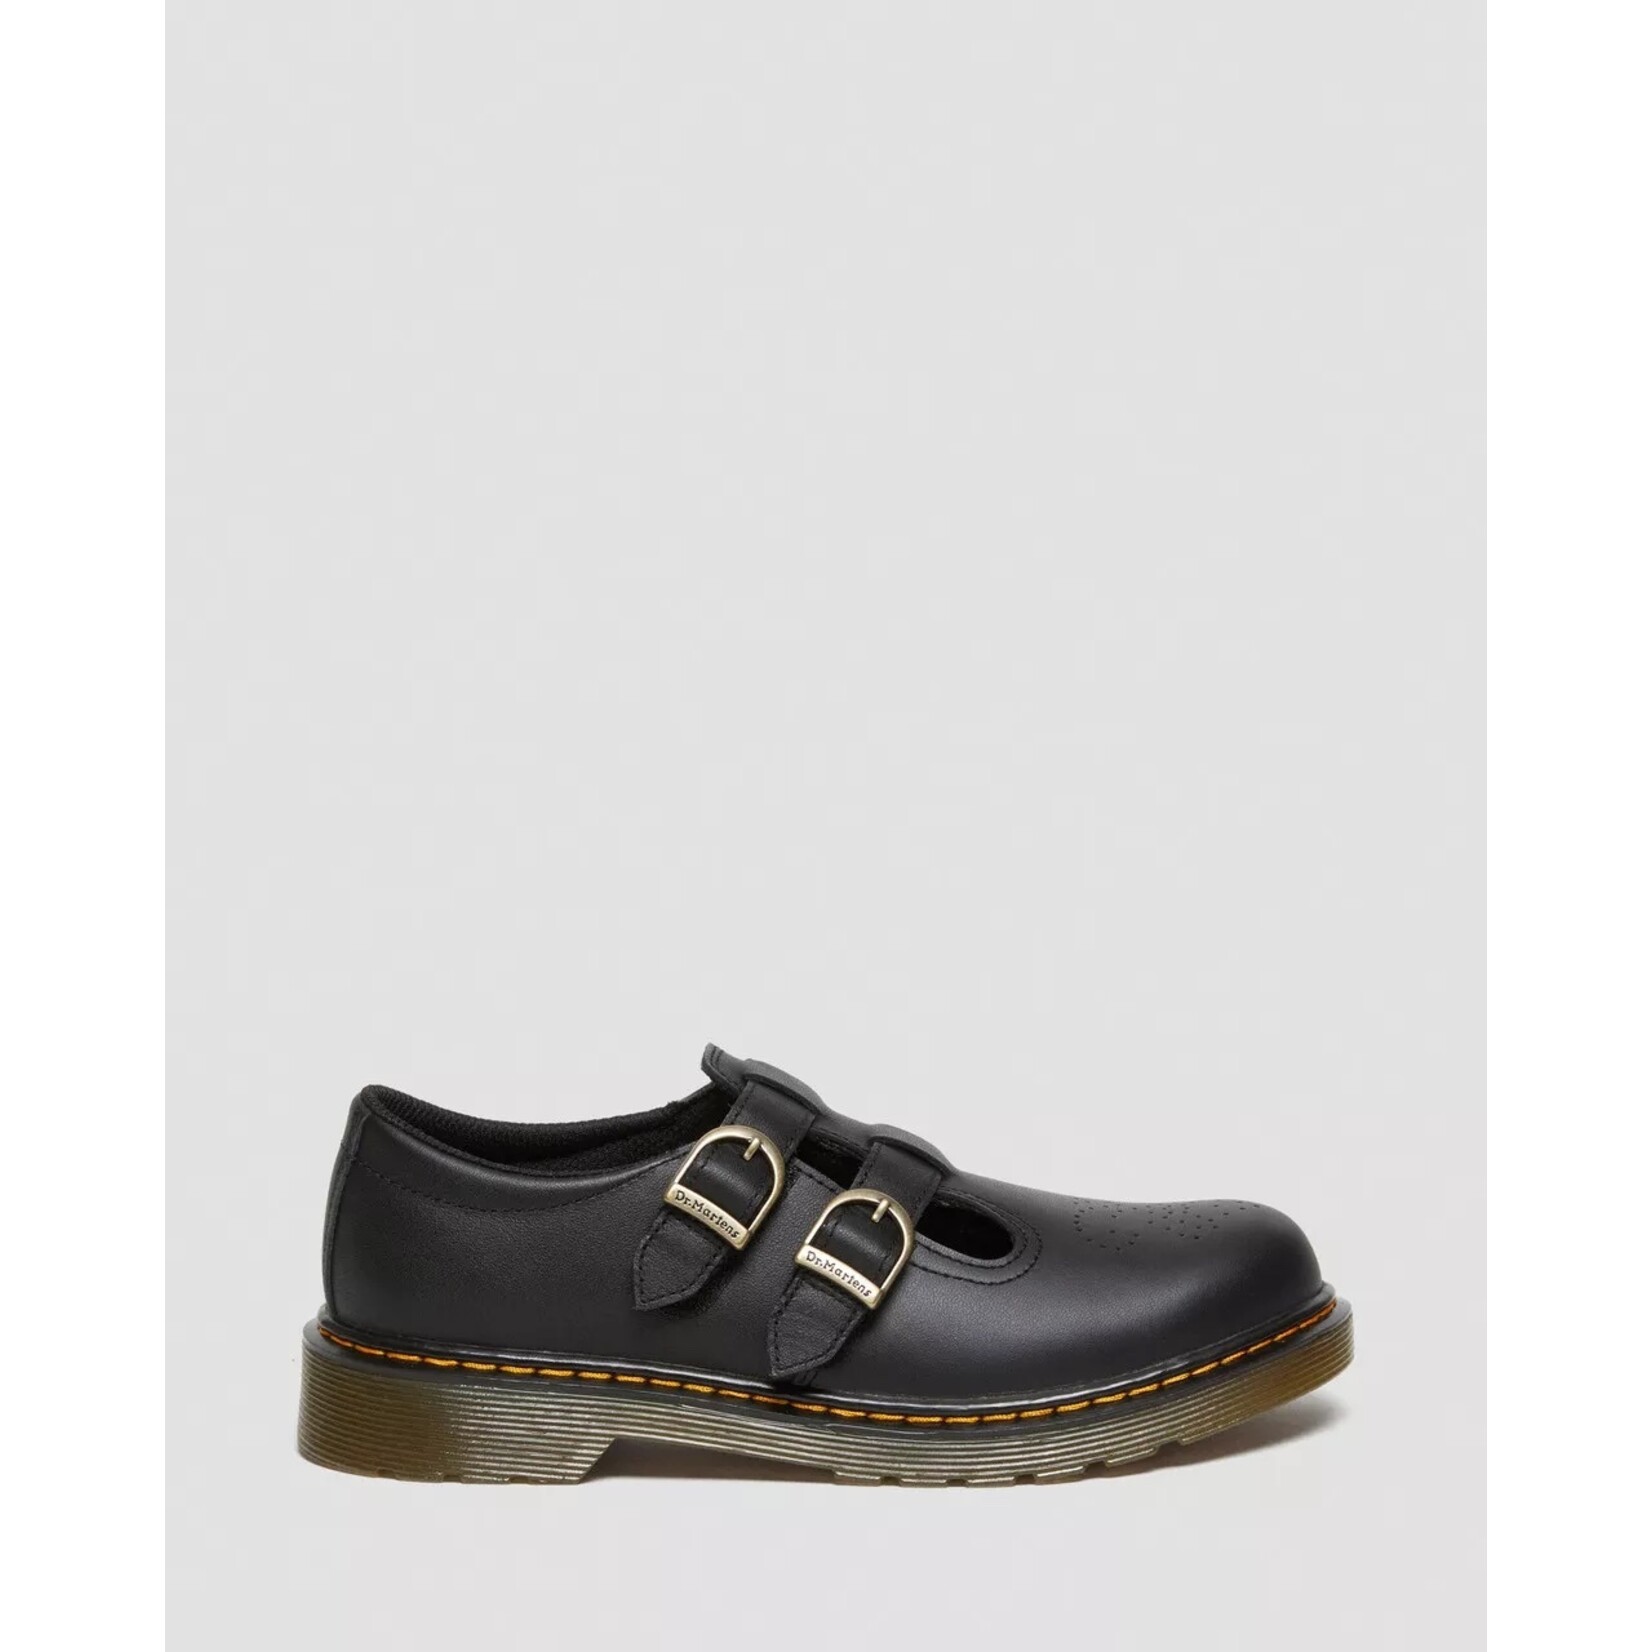 Doc Martens DOC MARTENS Youth 8065 Mary Jane Shoe